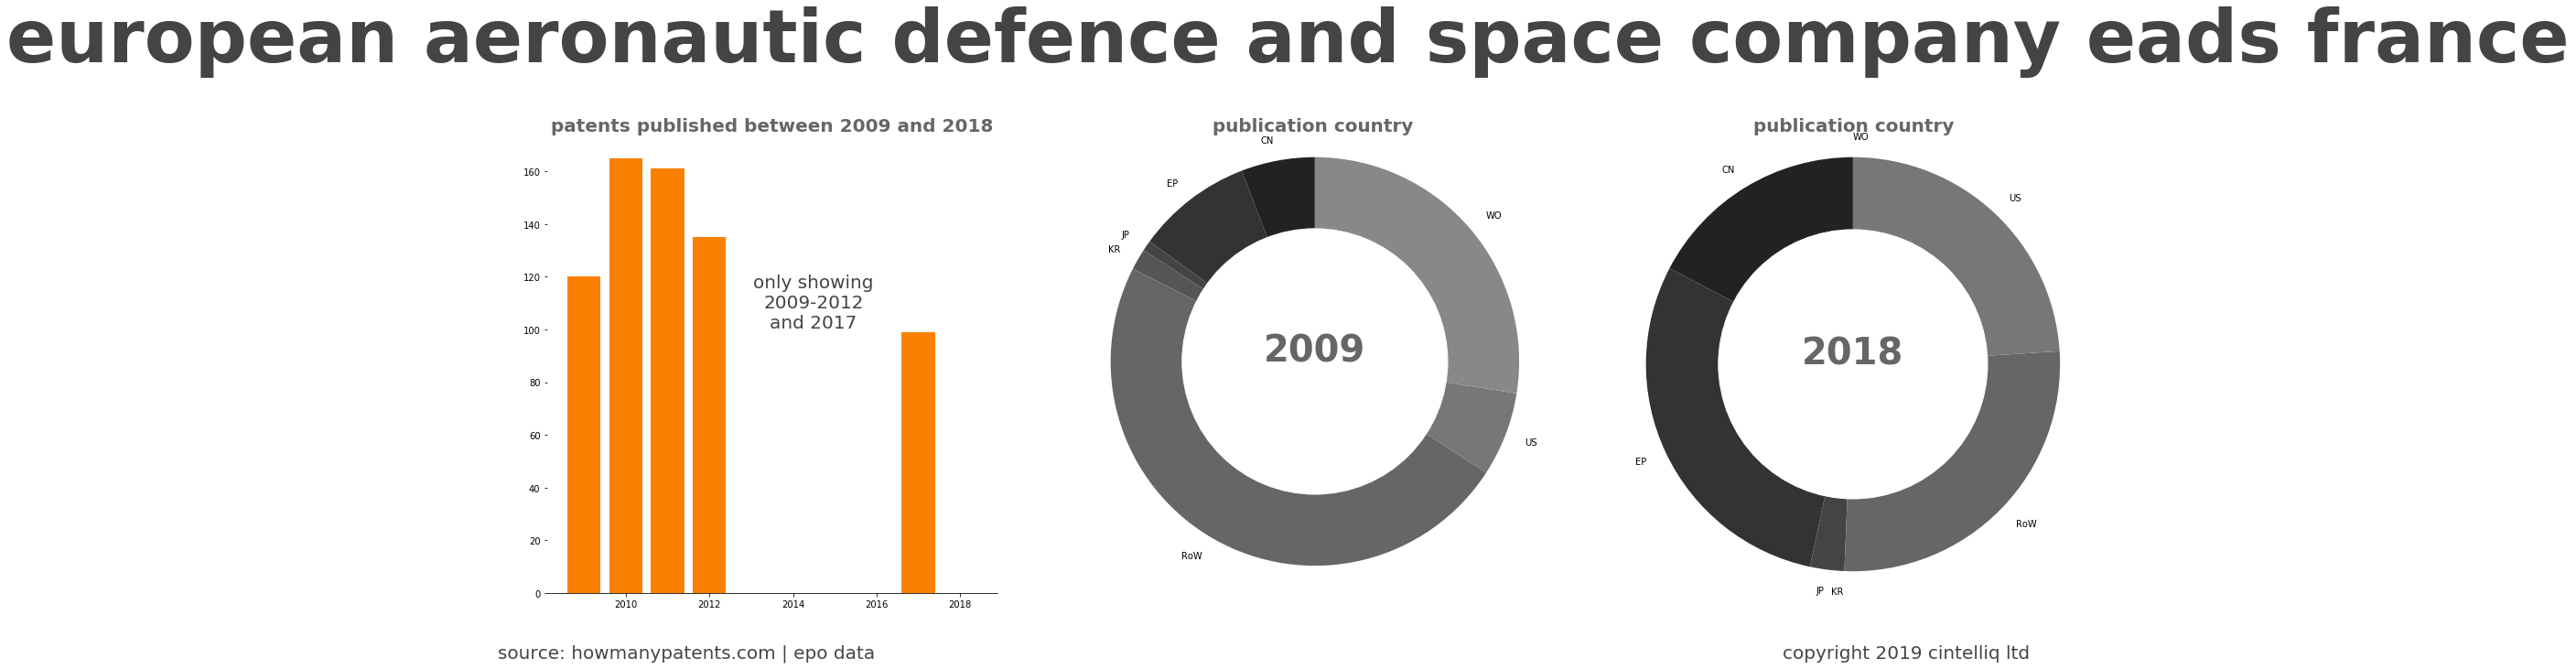 summary of patents for European Aeronautic Defence And Space Company Eads France